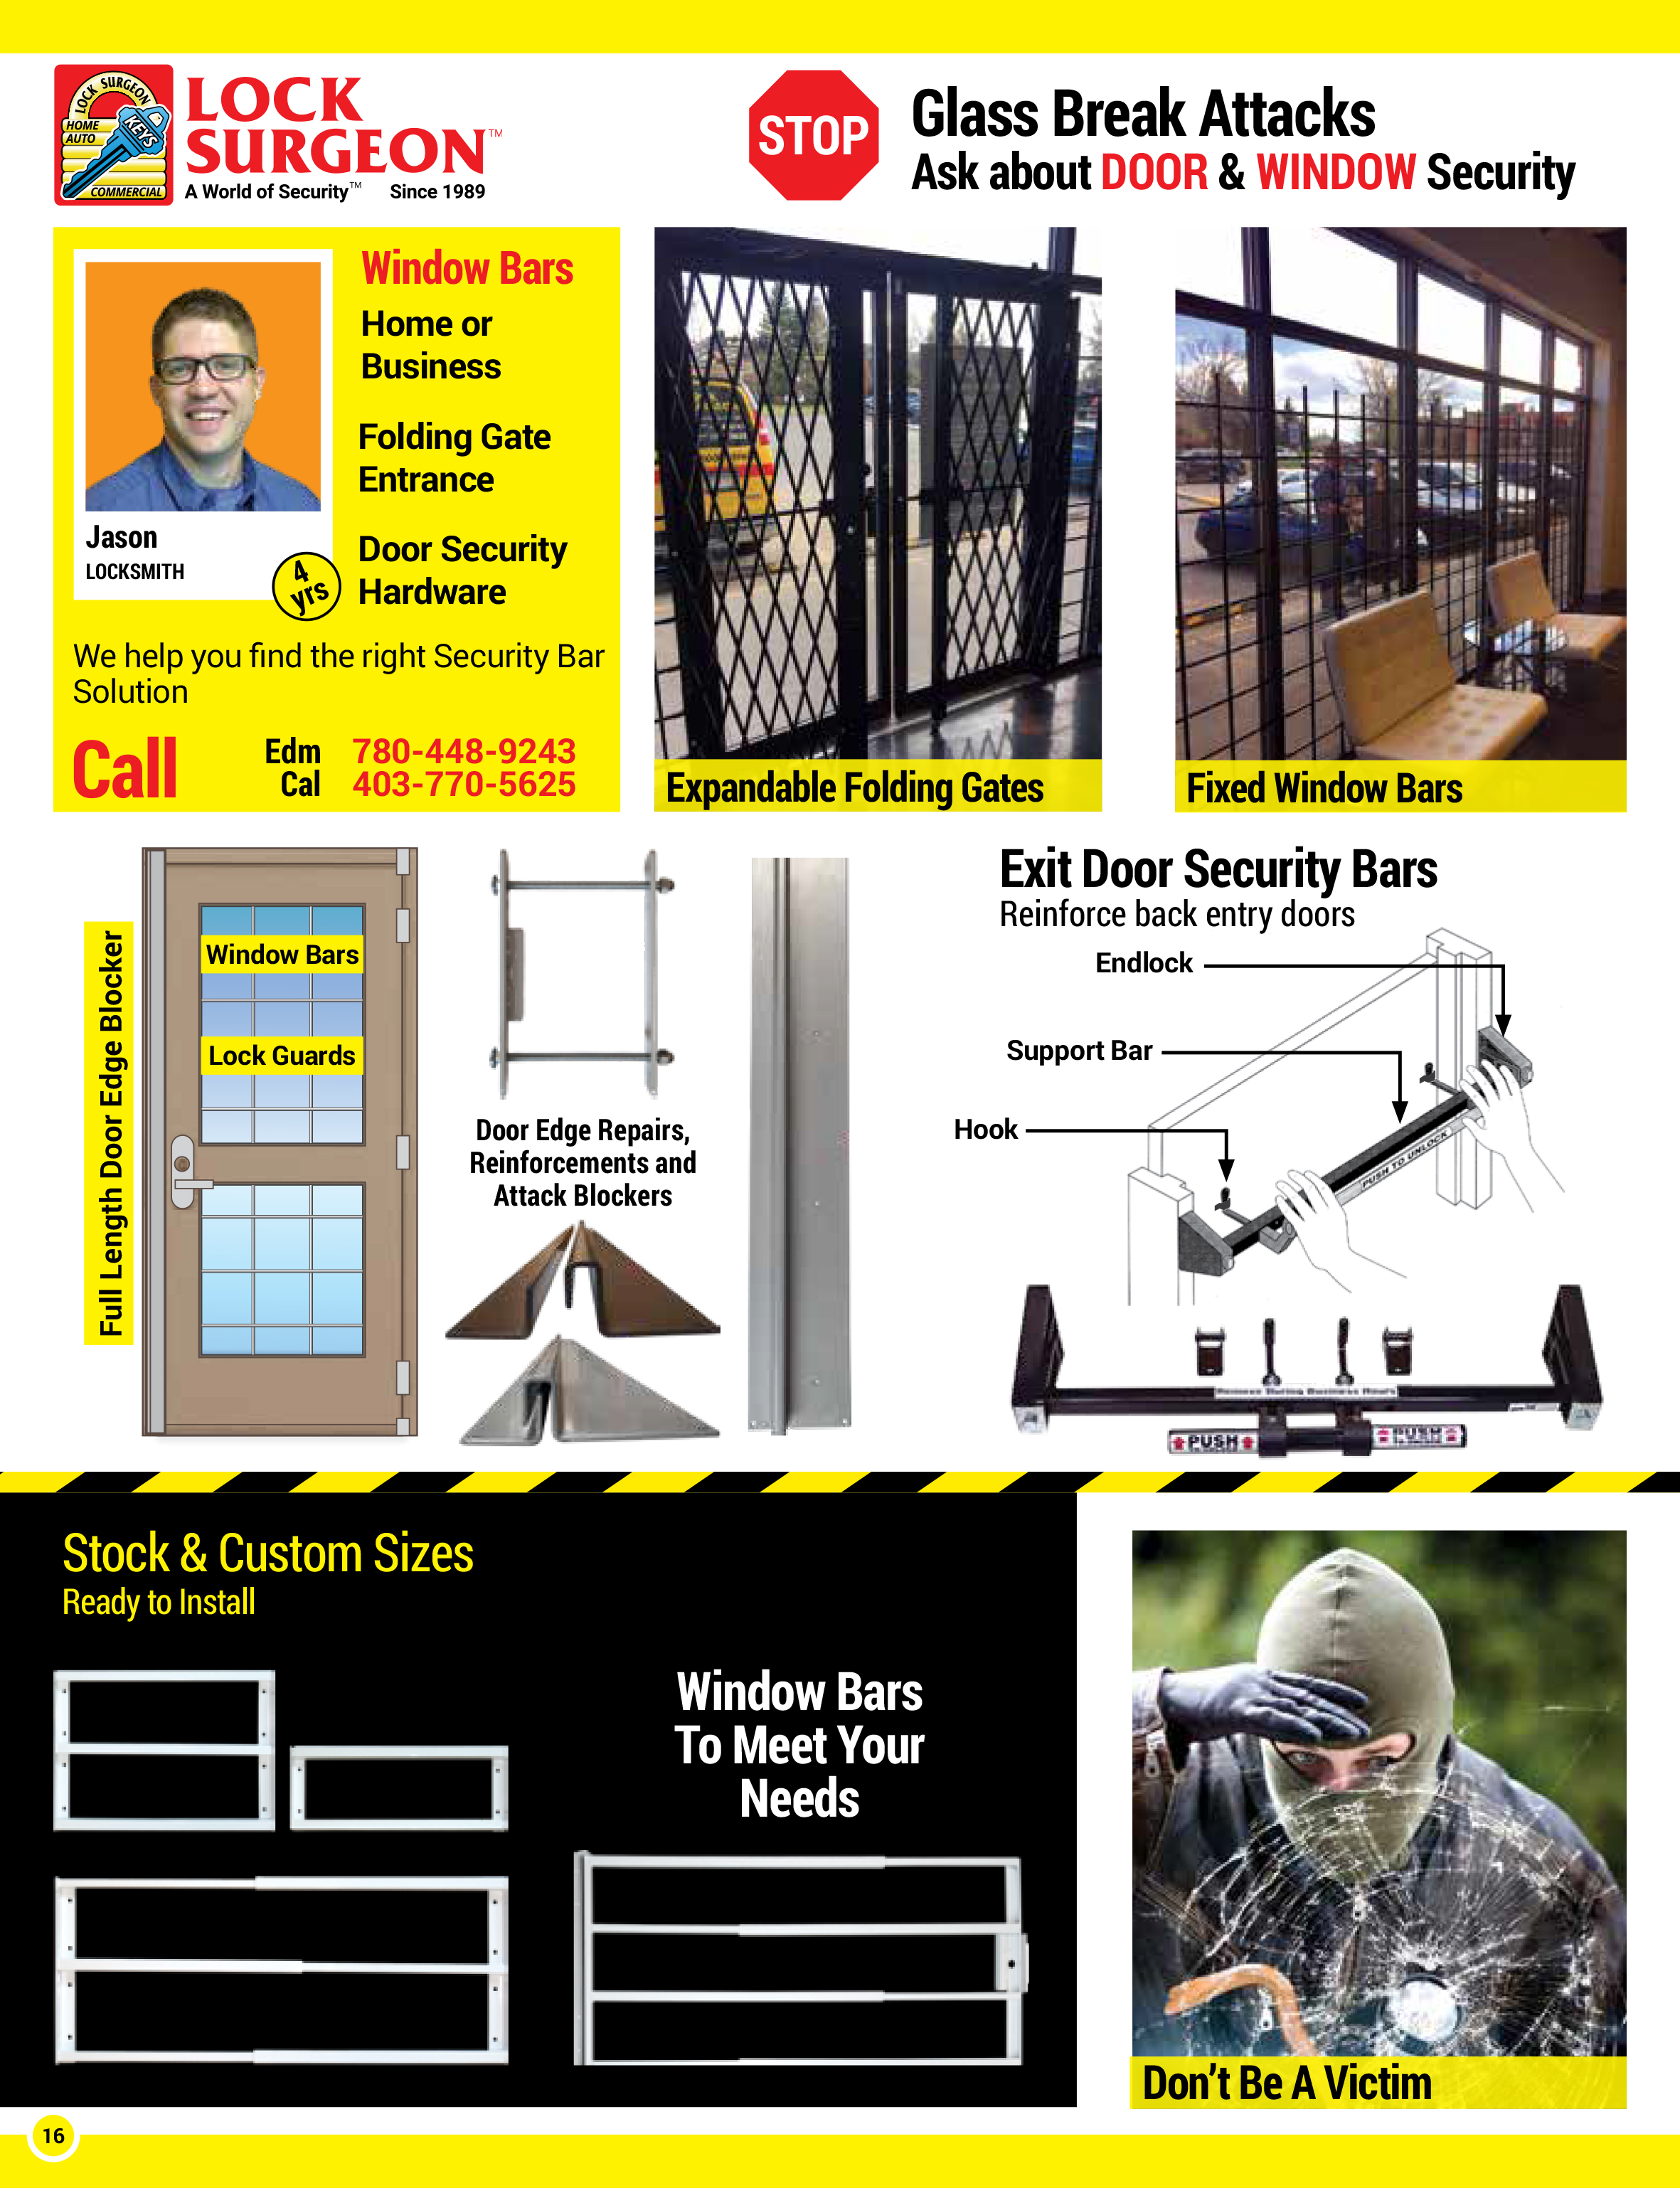 Door and window security bars, full edge door blockers, lock guards, door edge reinforcements, back entry barrier bars, stock and custom size window bars, folding gates, supplied and installed